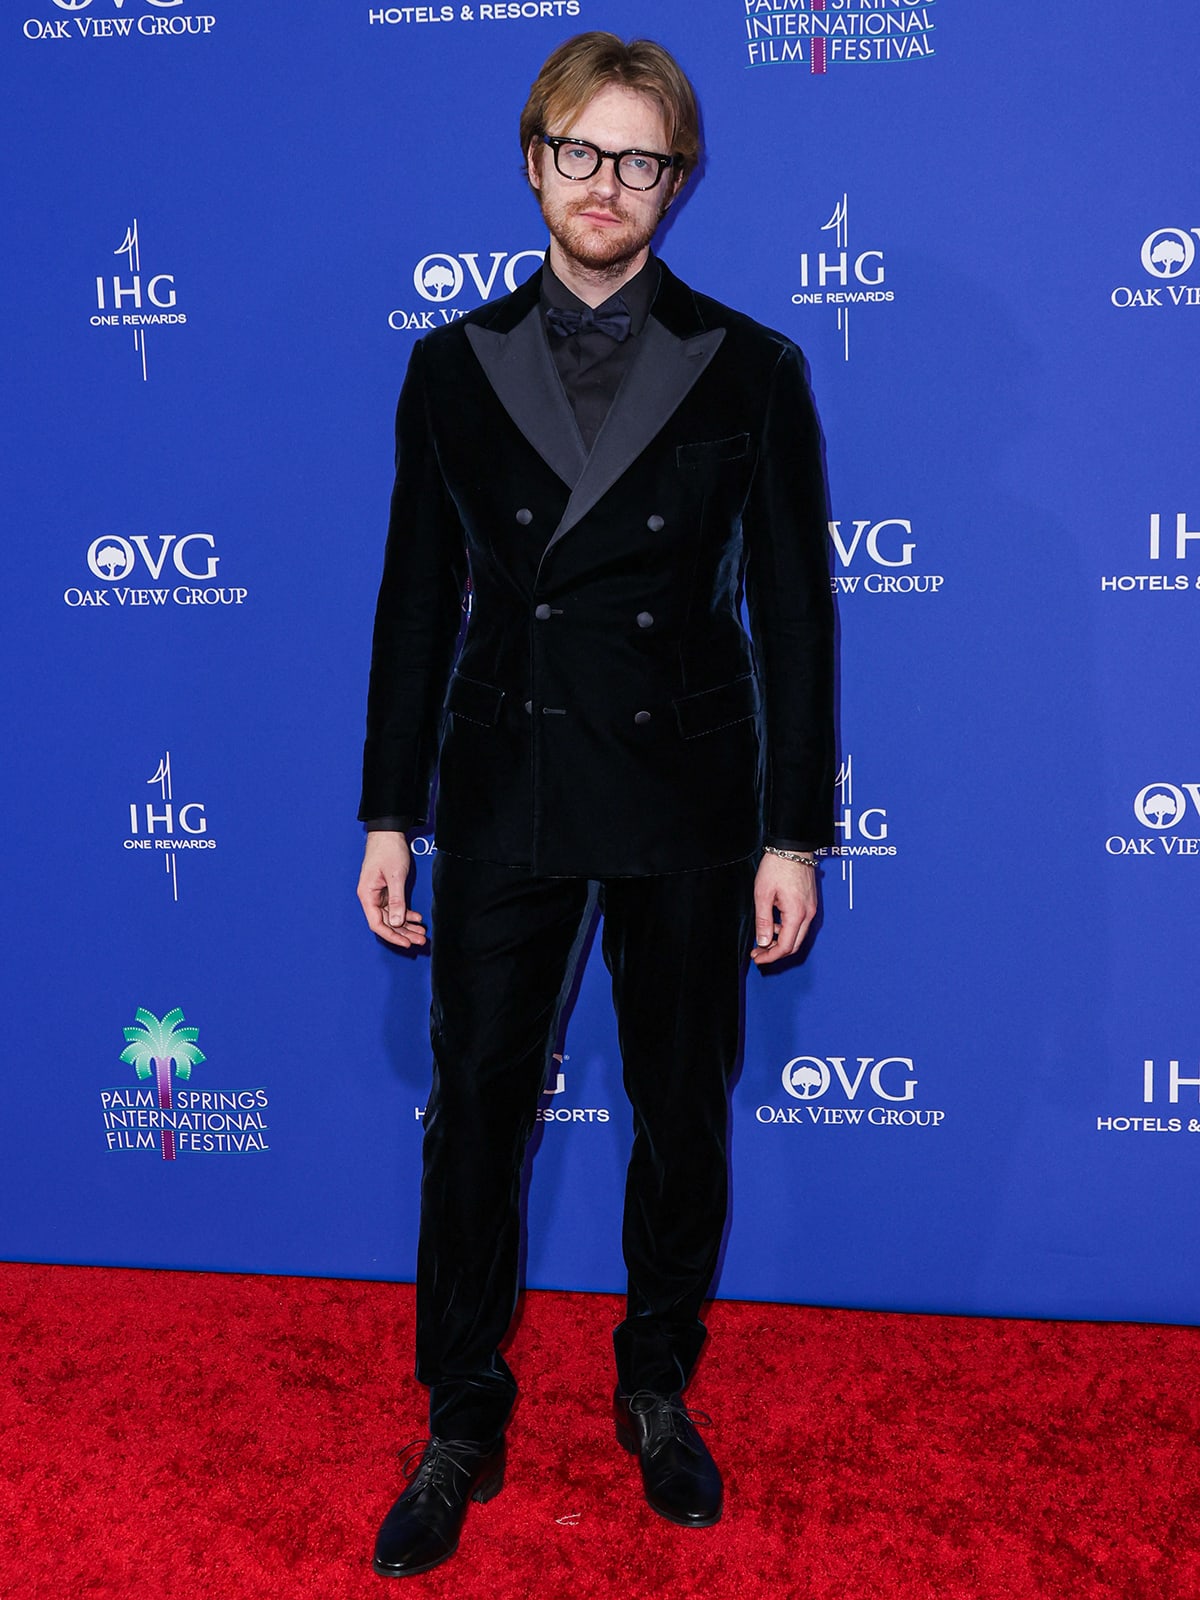 Finneas Baird O'Connell looks dapper in a black velvet suit, matching trousers, and a black shirt with a black bowtie